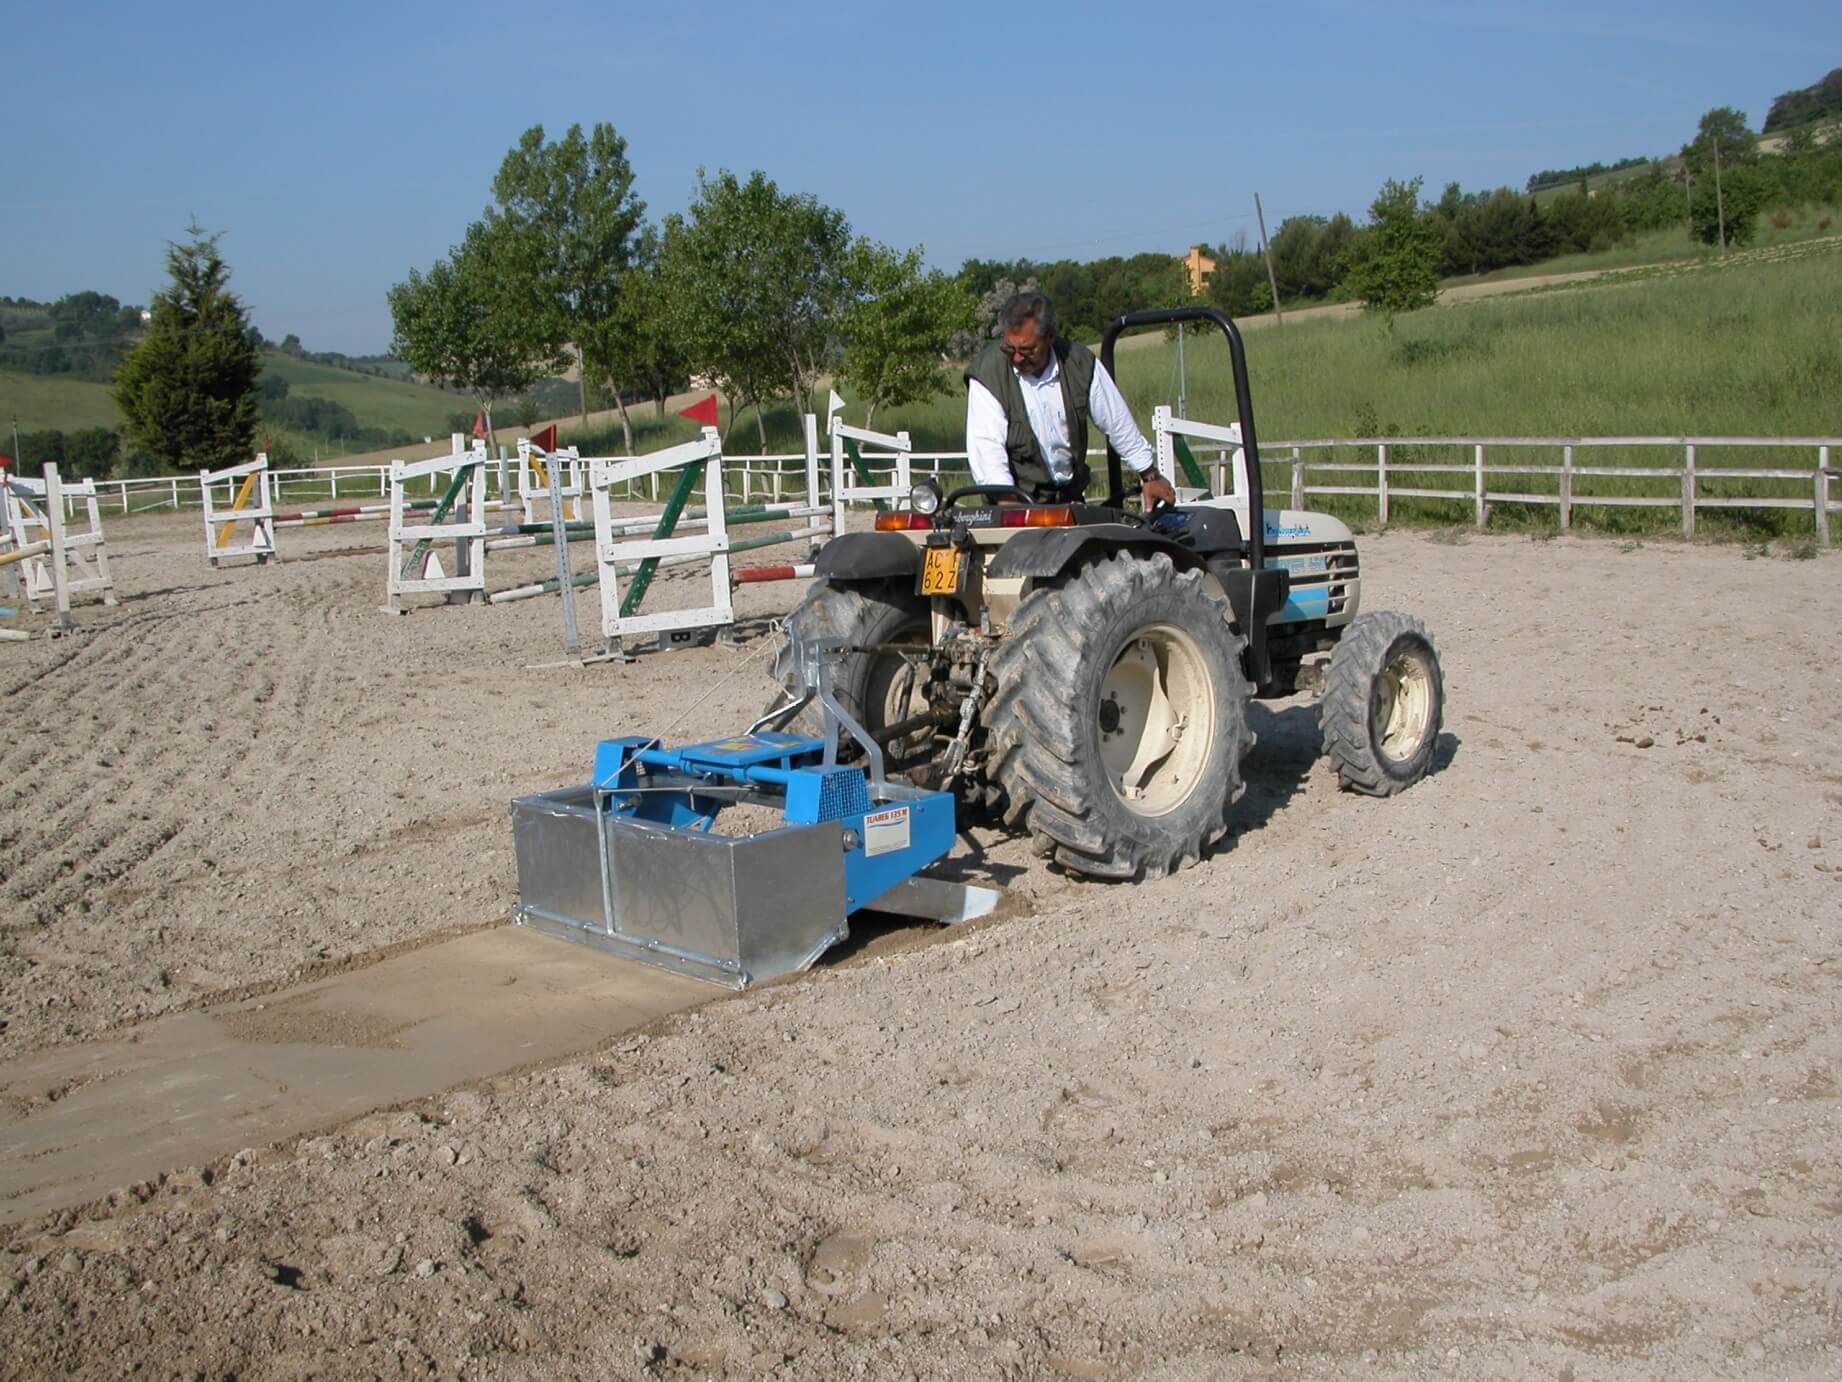 Racecourses and Riding Stables - Care Cleaning and Reclamation